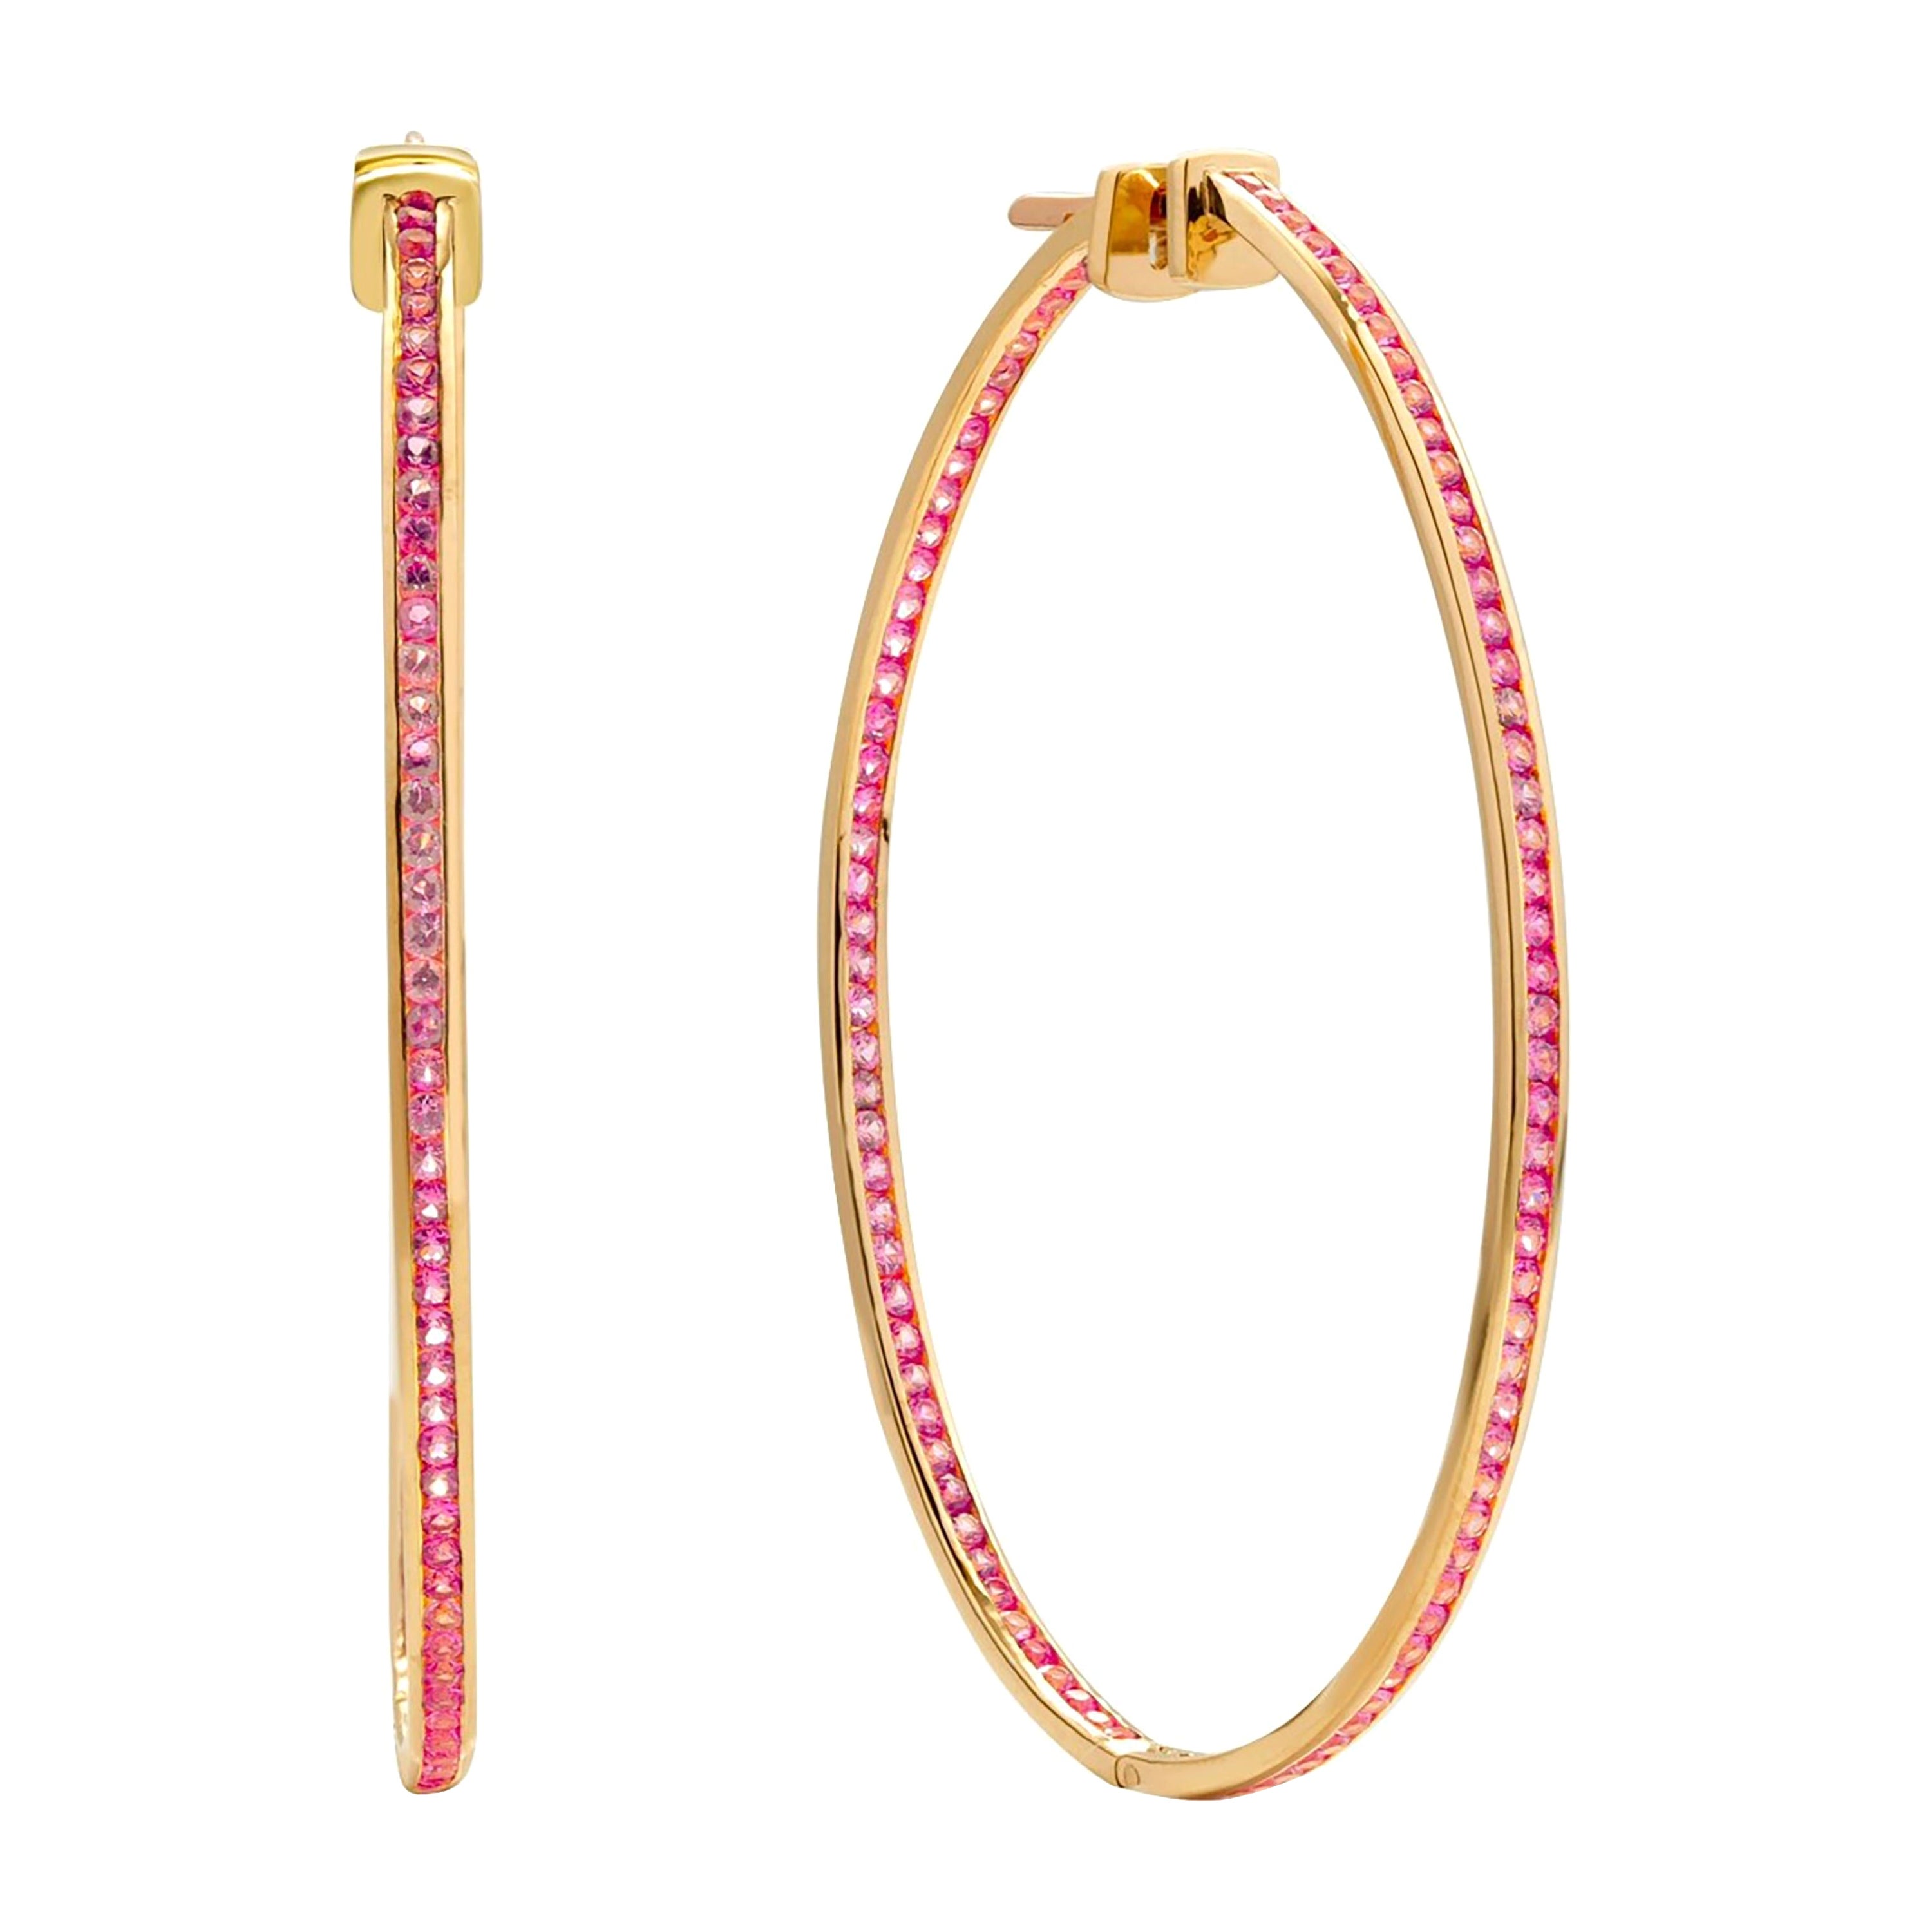 Inside Out 10 Carat Ceylon Pink Sapphire 2.5 Inch Yellow Gold Hoop Earrings 